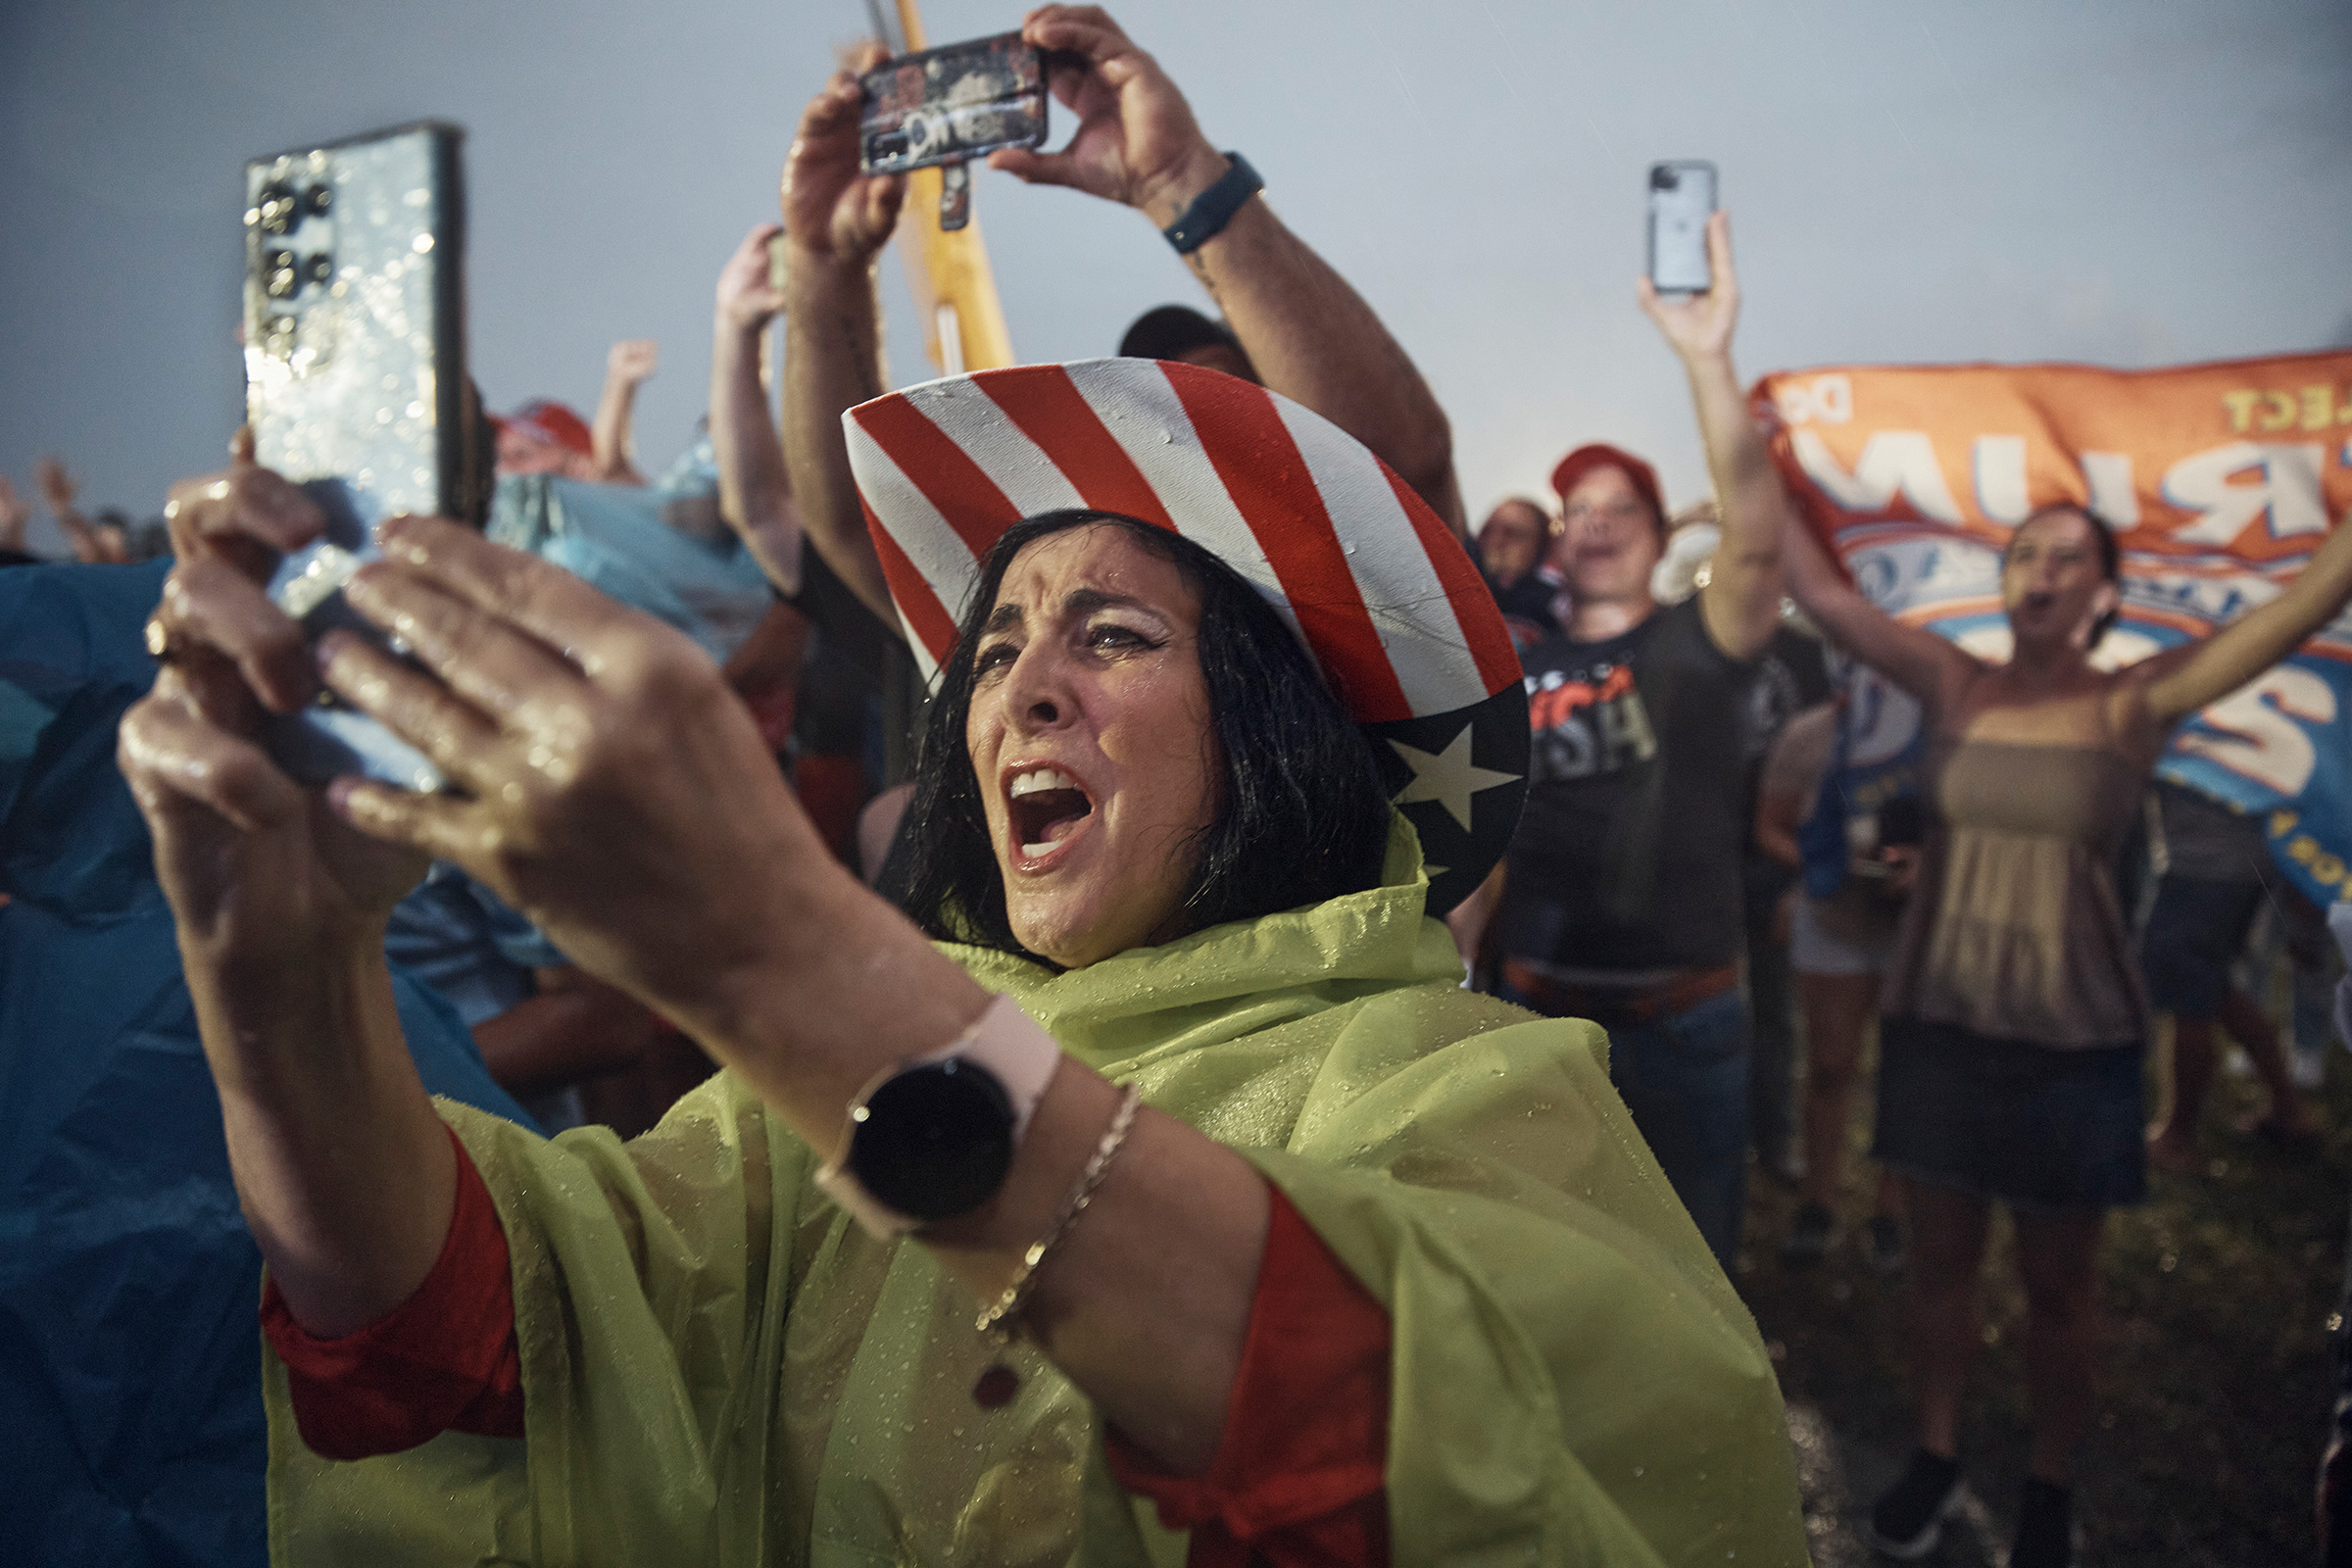 Supporters cheer as it rains at a Trump rally in Miami (Andres Kudacki for TIME)